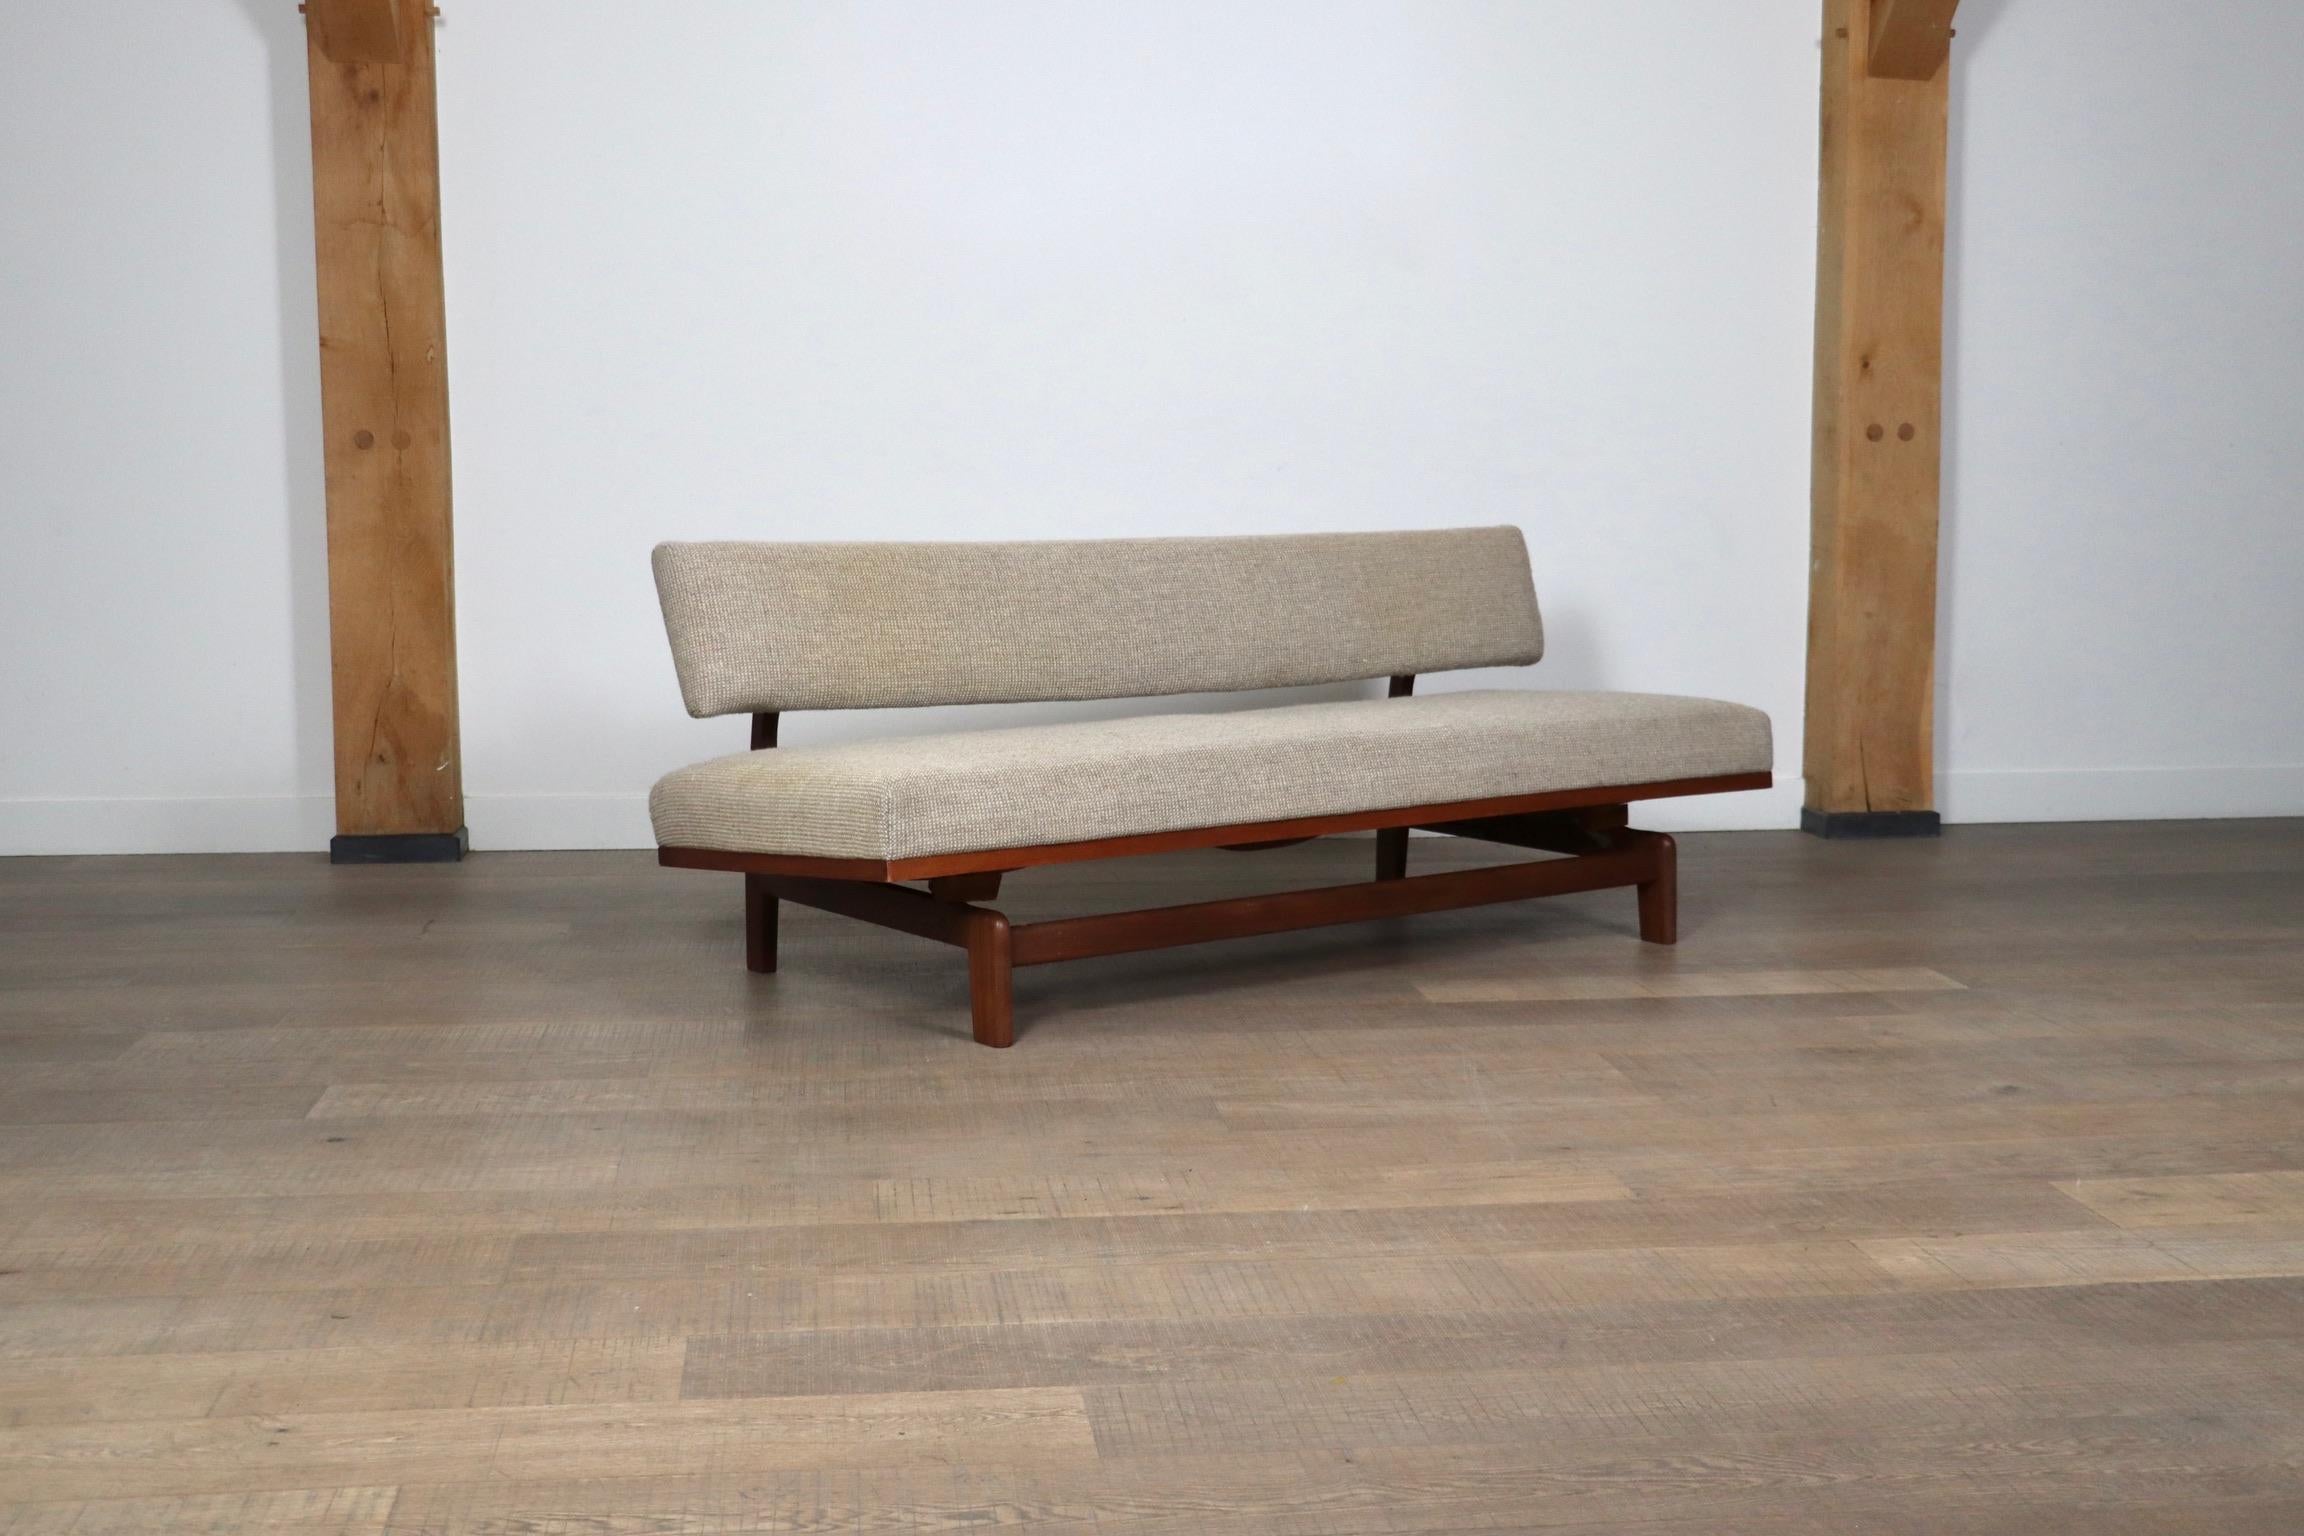 Beautiful teak wooden sofa which can be extended into a daybed by Hans Bellmann, and produced by Wilkhahn in Germany. The sophisticated design of the wooden frame makes the sofa visually pleasing from any side, and especially the backside. Still